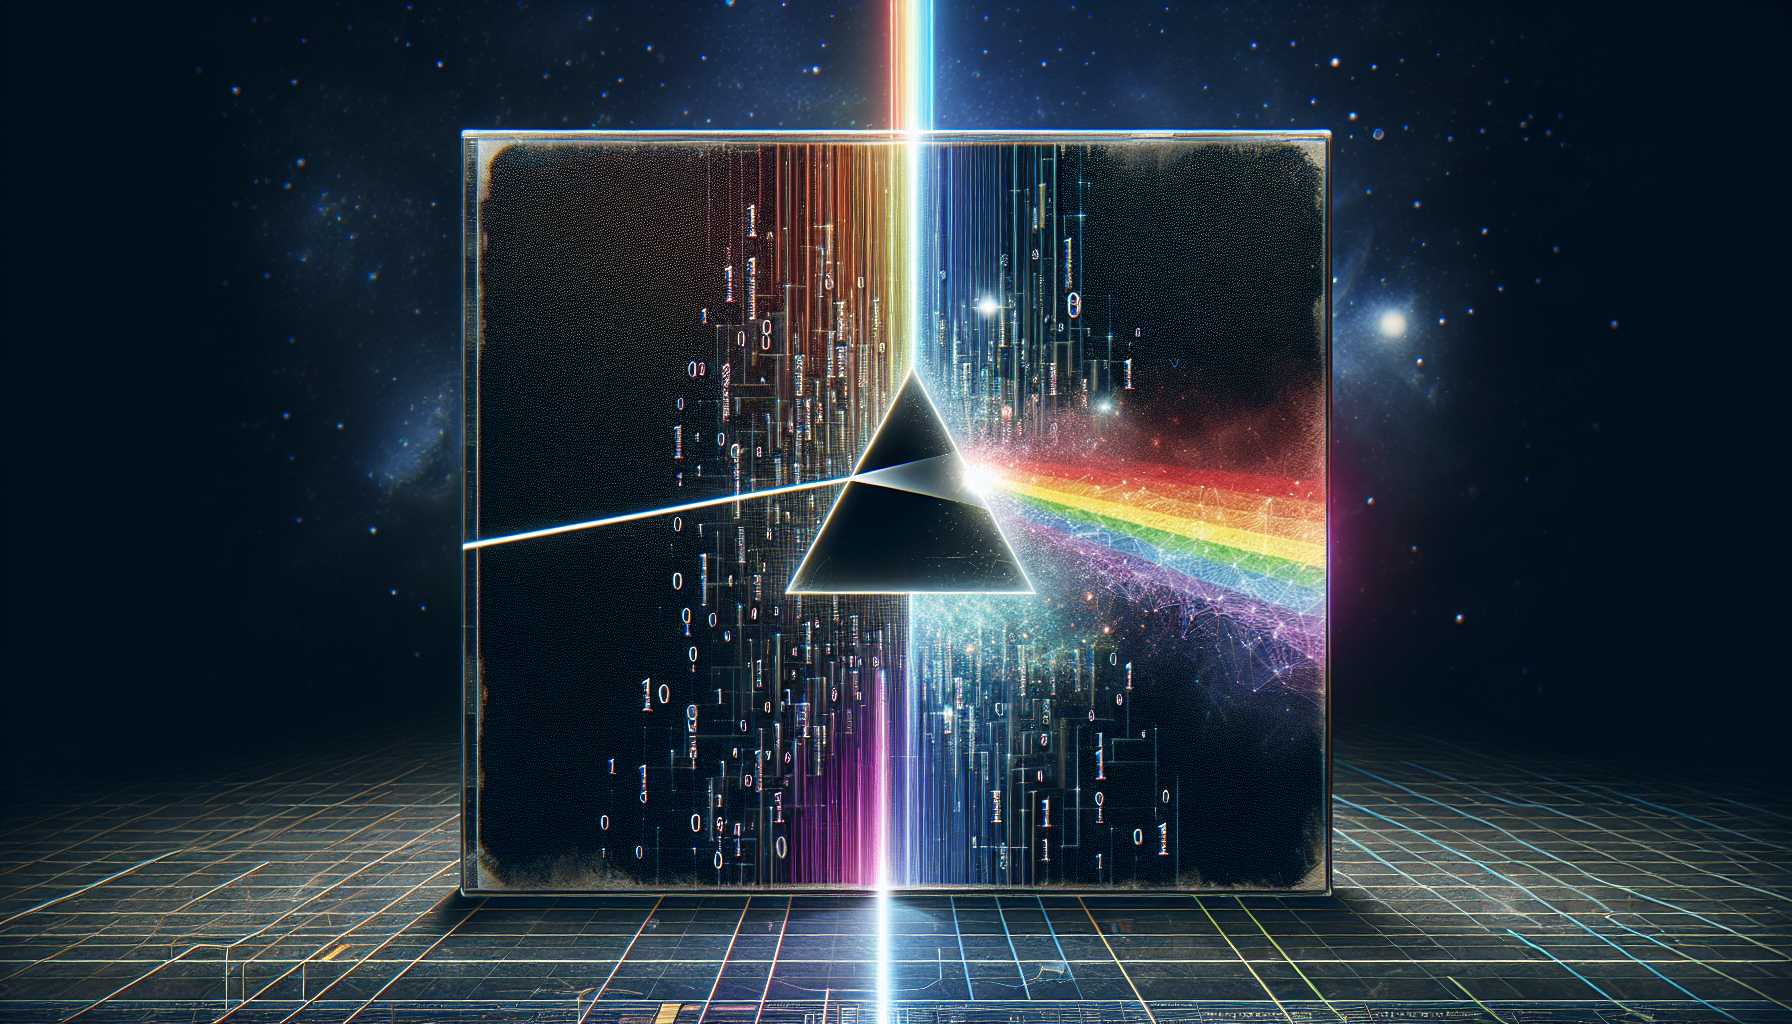 Pink Floyd's Dark Side of the Moon album artwork with AI elements